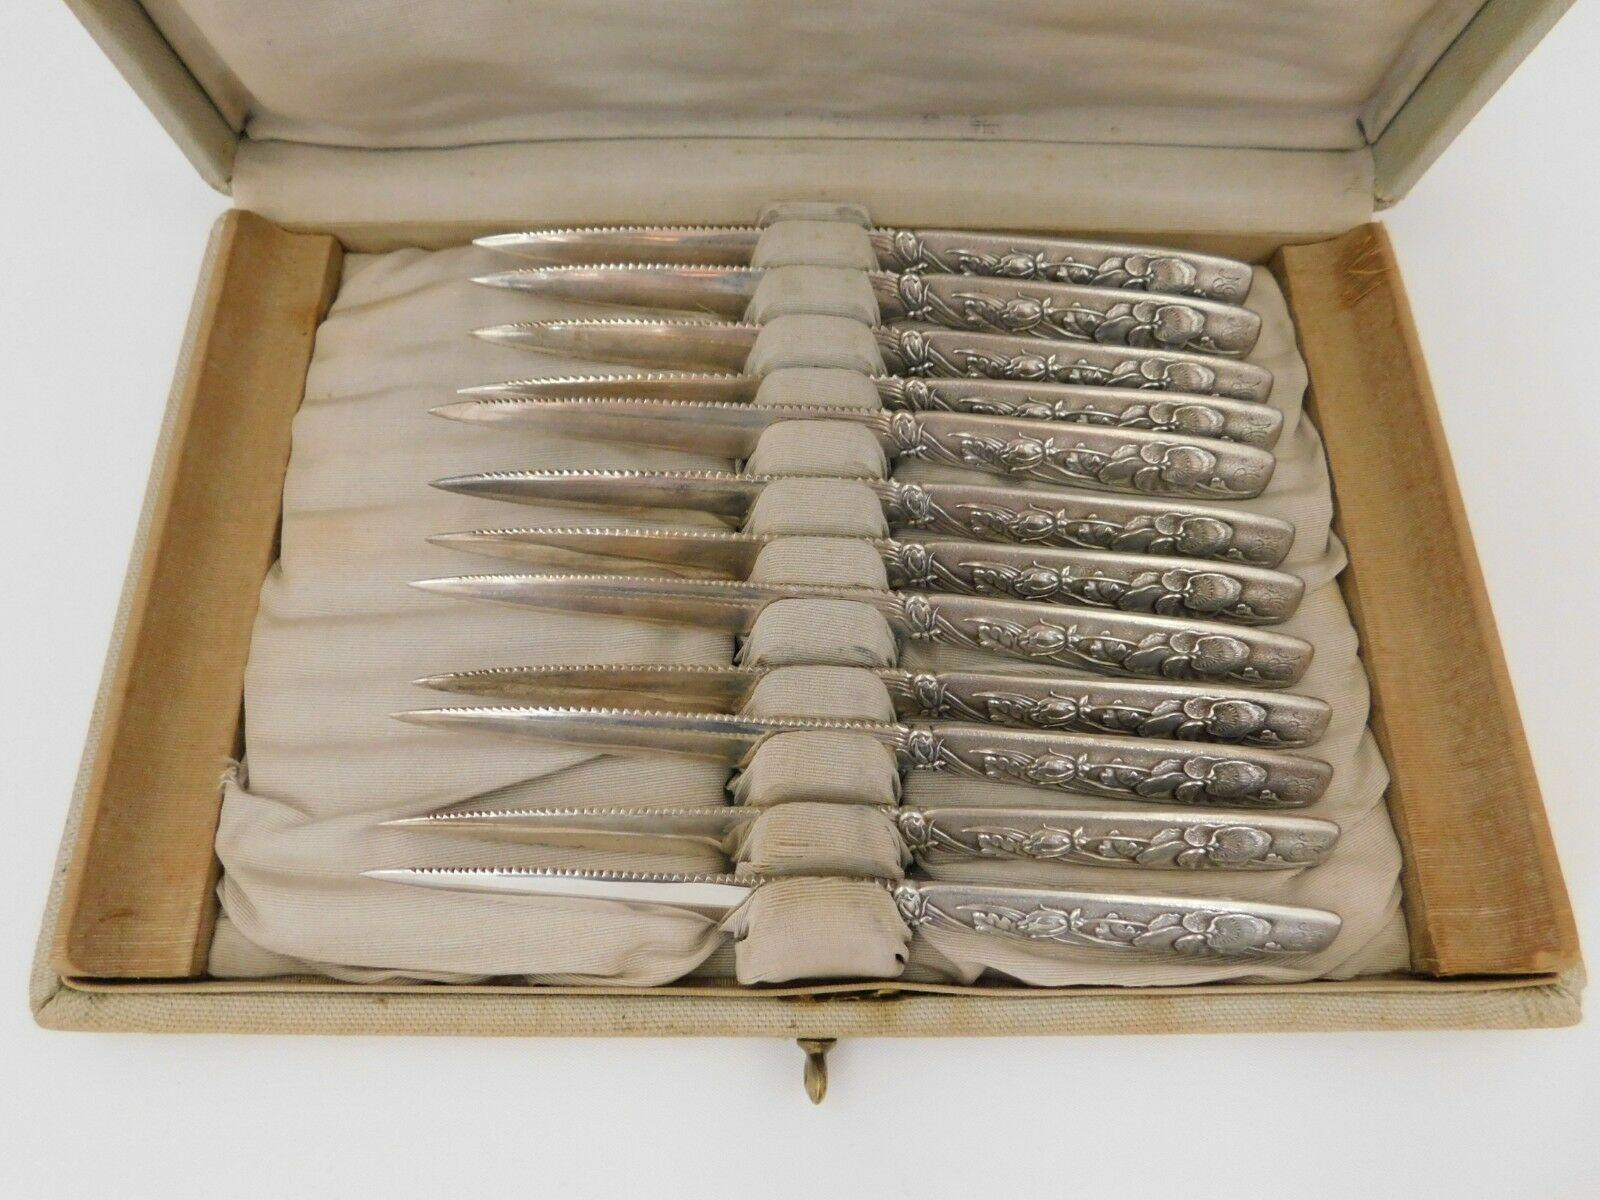 Vine by Tiffany & Co. Sterling Silver Fruit Knife Set in Original Box Serrated In Excellent Condition For Sale In Big Bend, WI